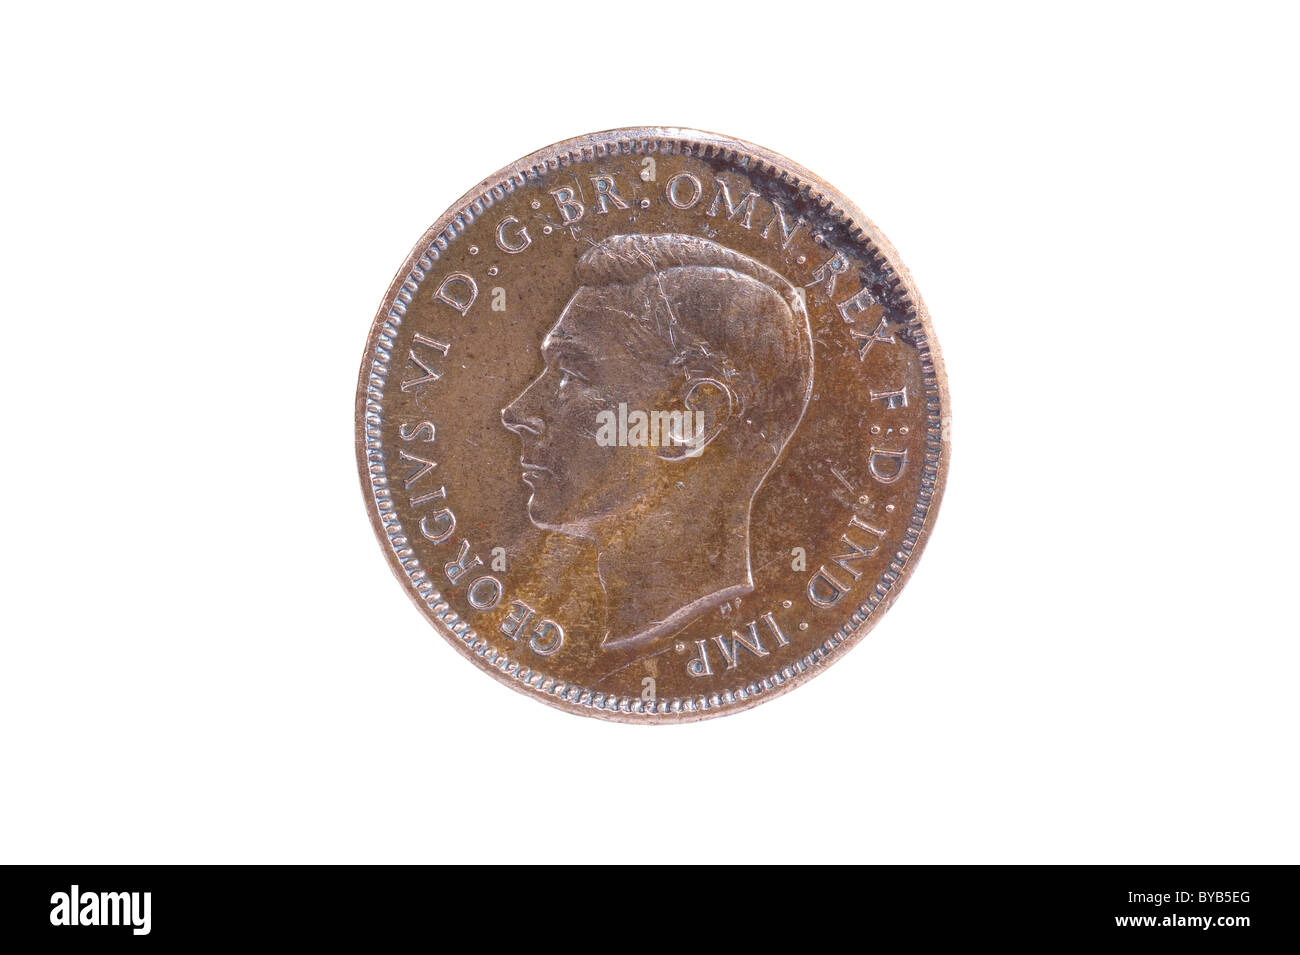 Obverse side of a 1937 British Farthing coin showing King George VI Stock Photo